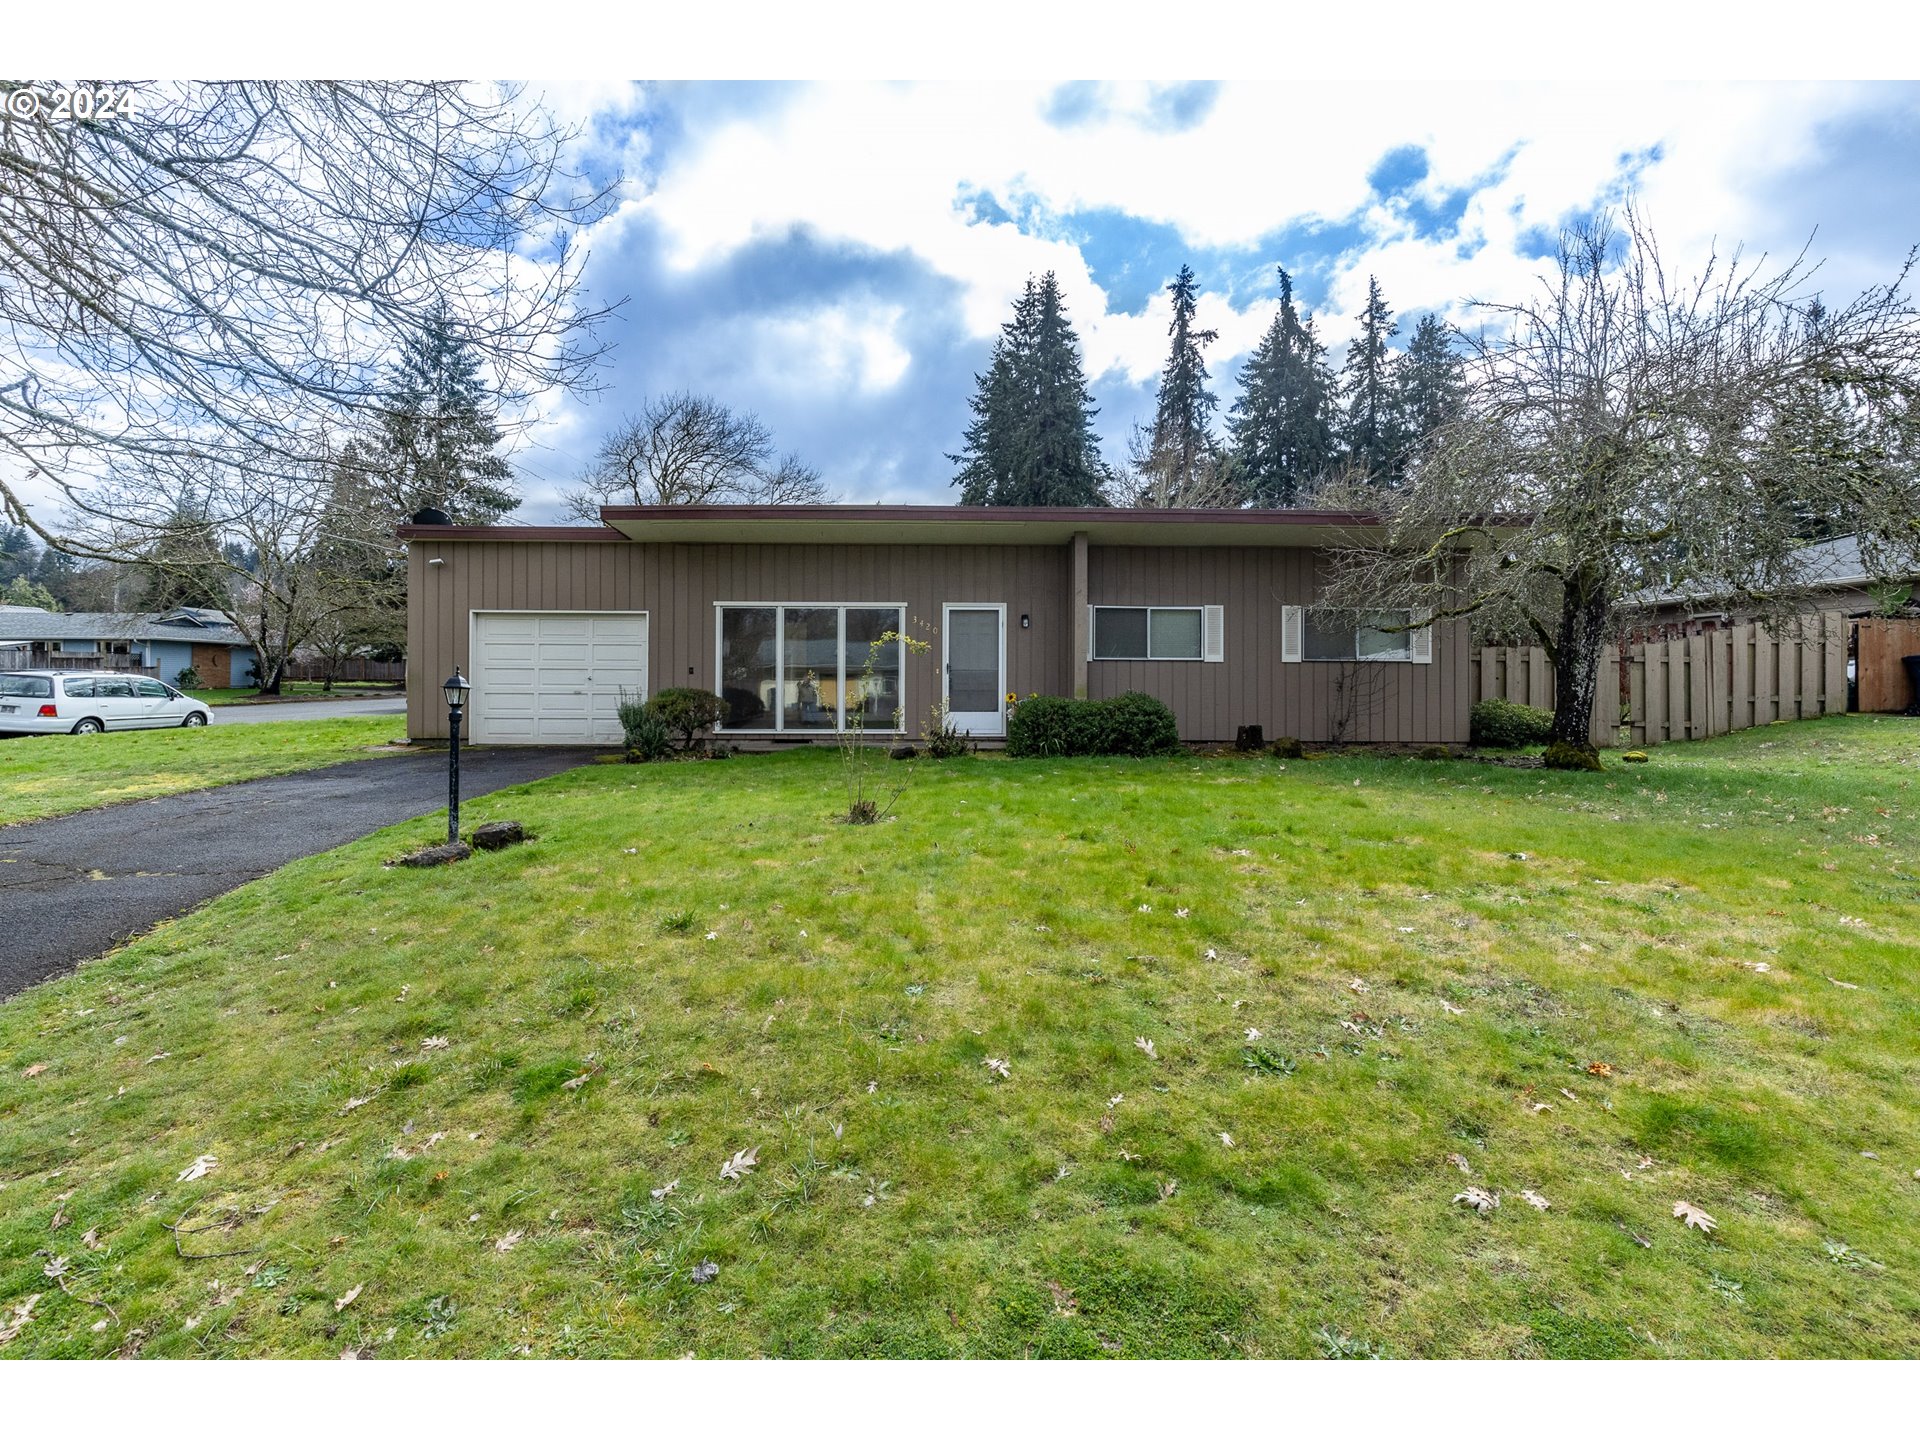 3420 W 16TH AVE, Eugene, OR 